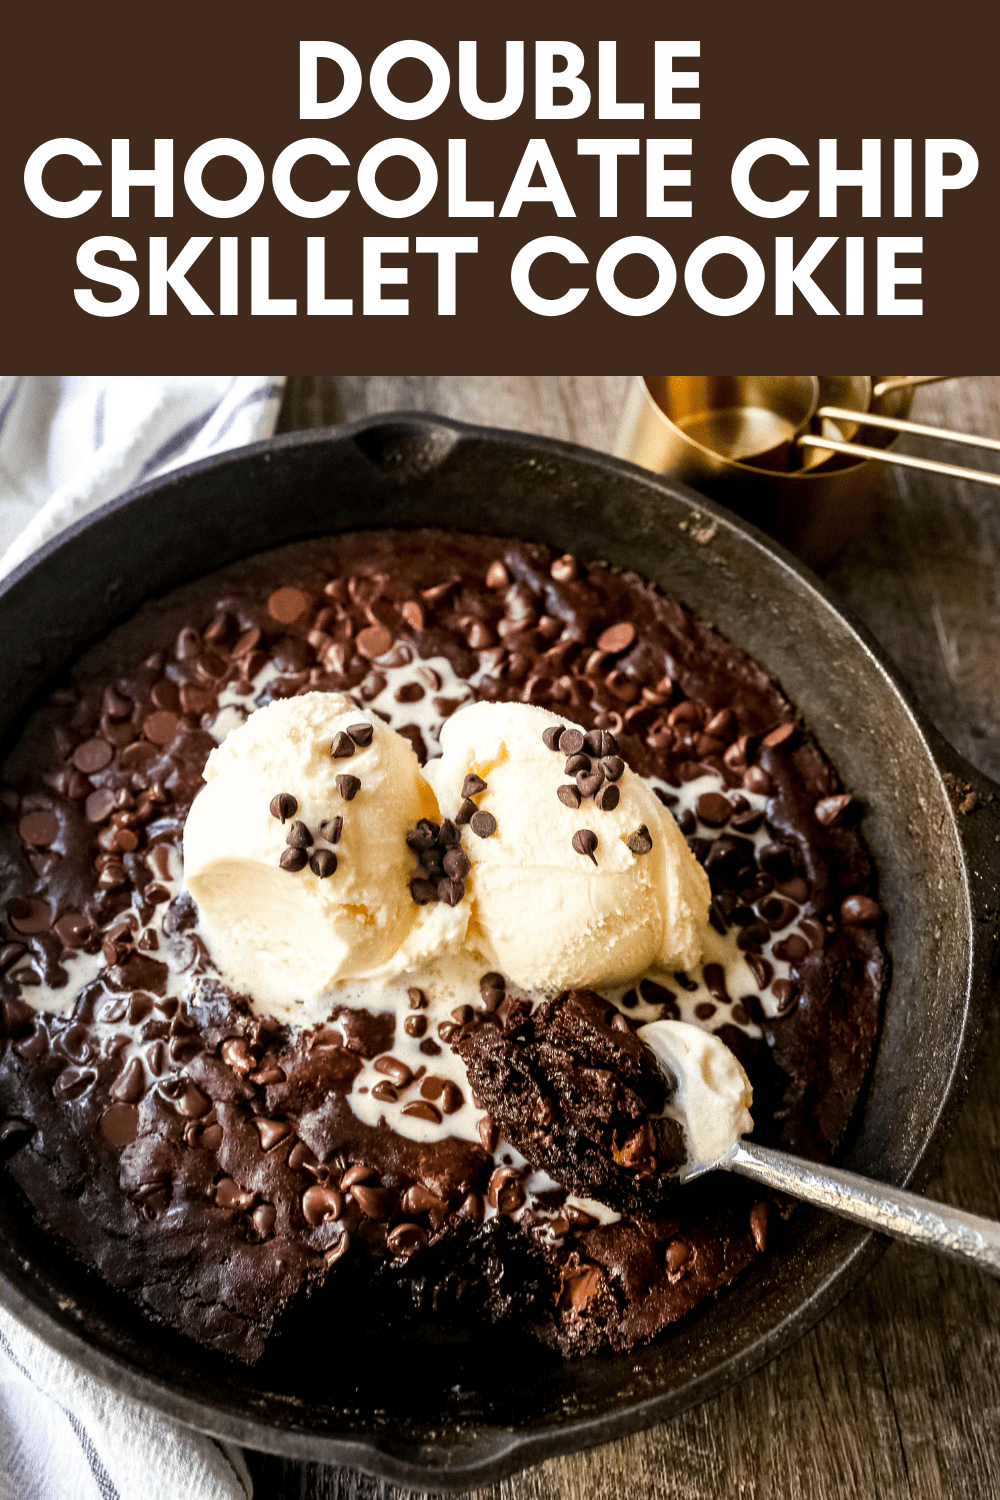 Brown Butter Chocolate Chip Cookie Skillet (Pizookie) - Damn Delicious